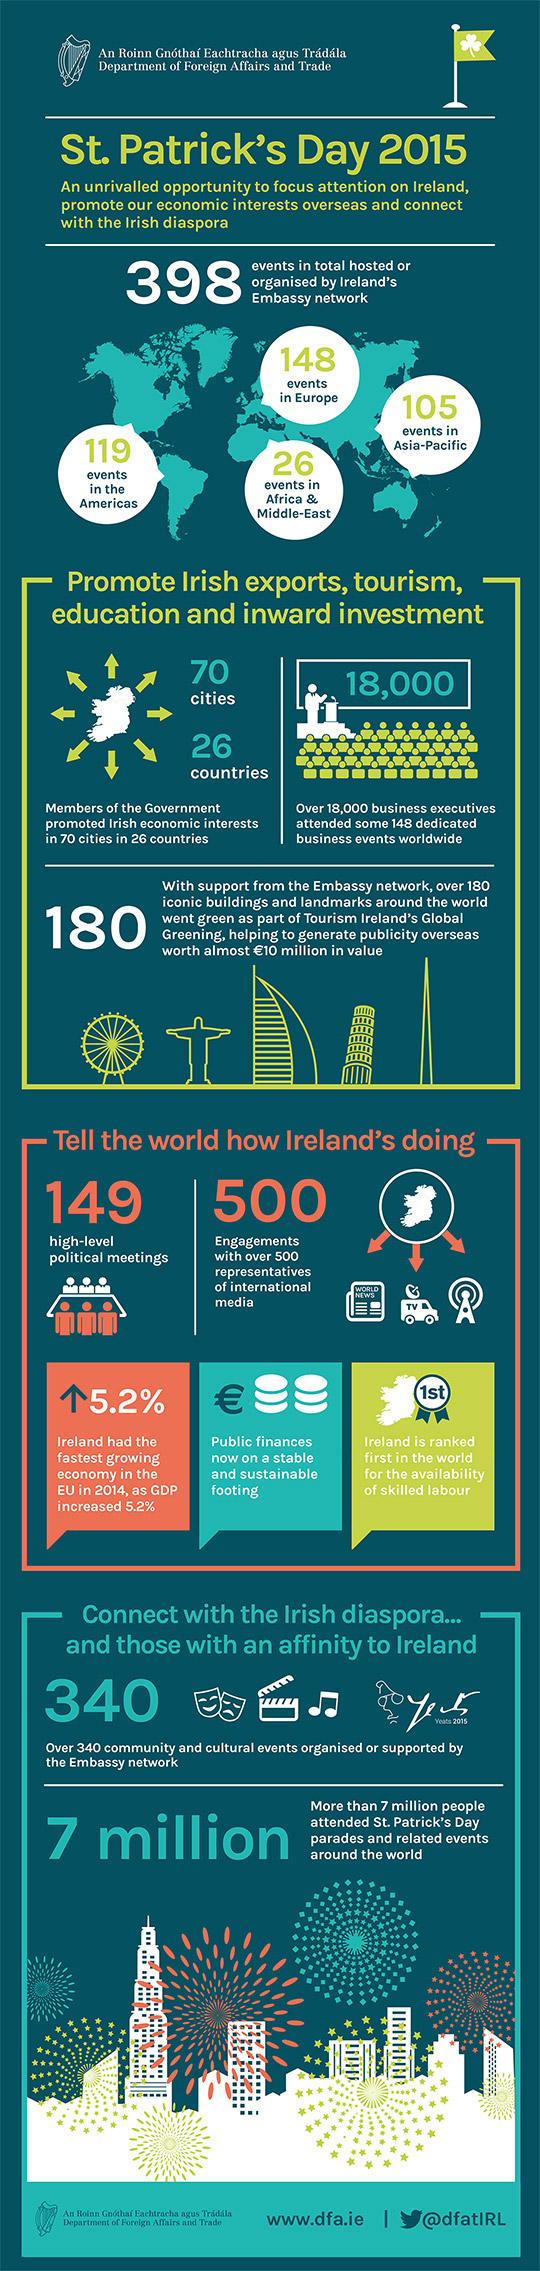 St Patrick's Day Infographic 2015